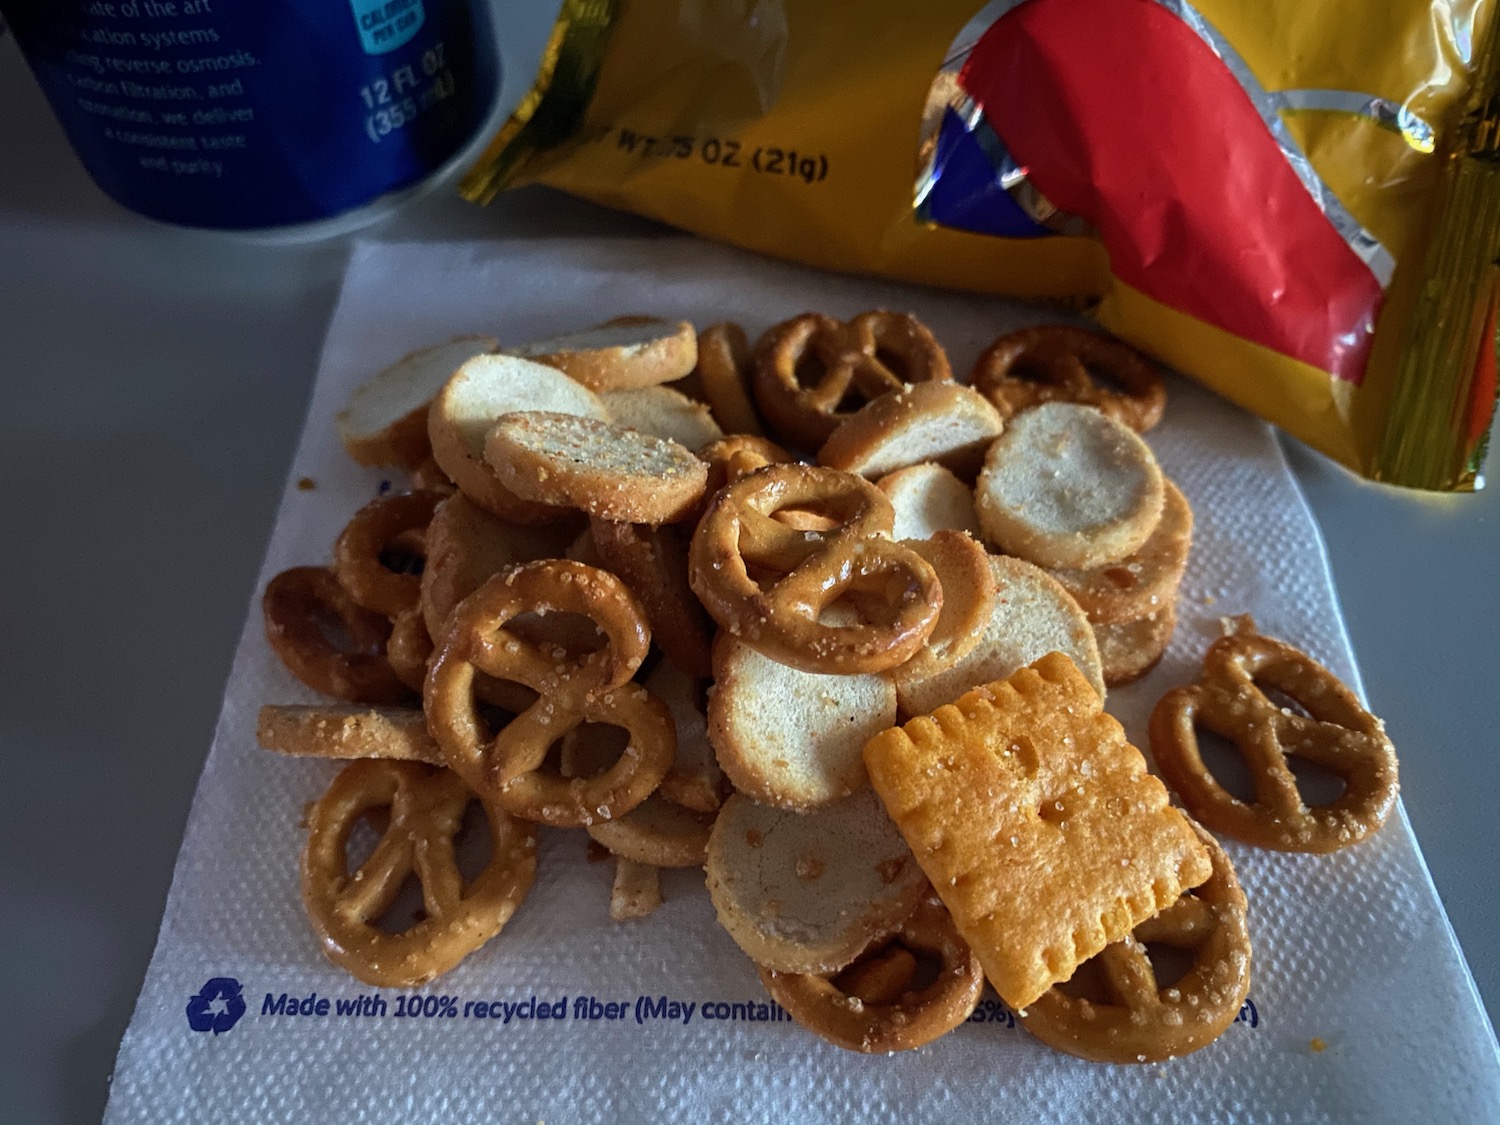 a pile of crackers and crackers on a napkin